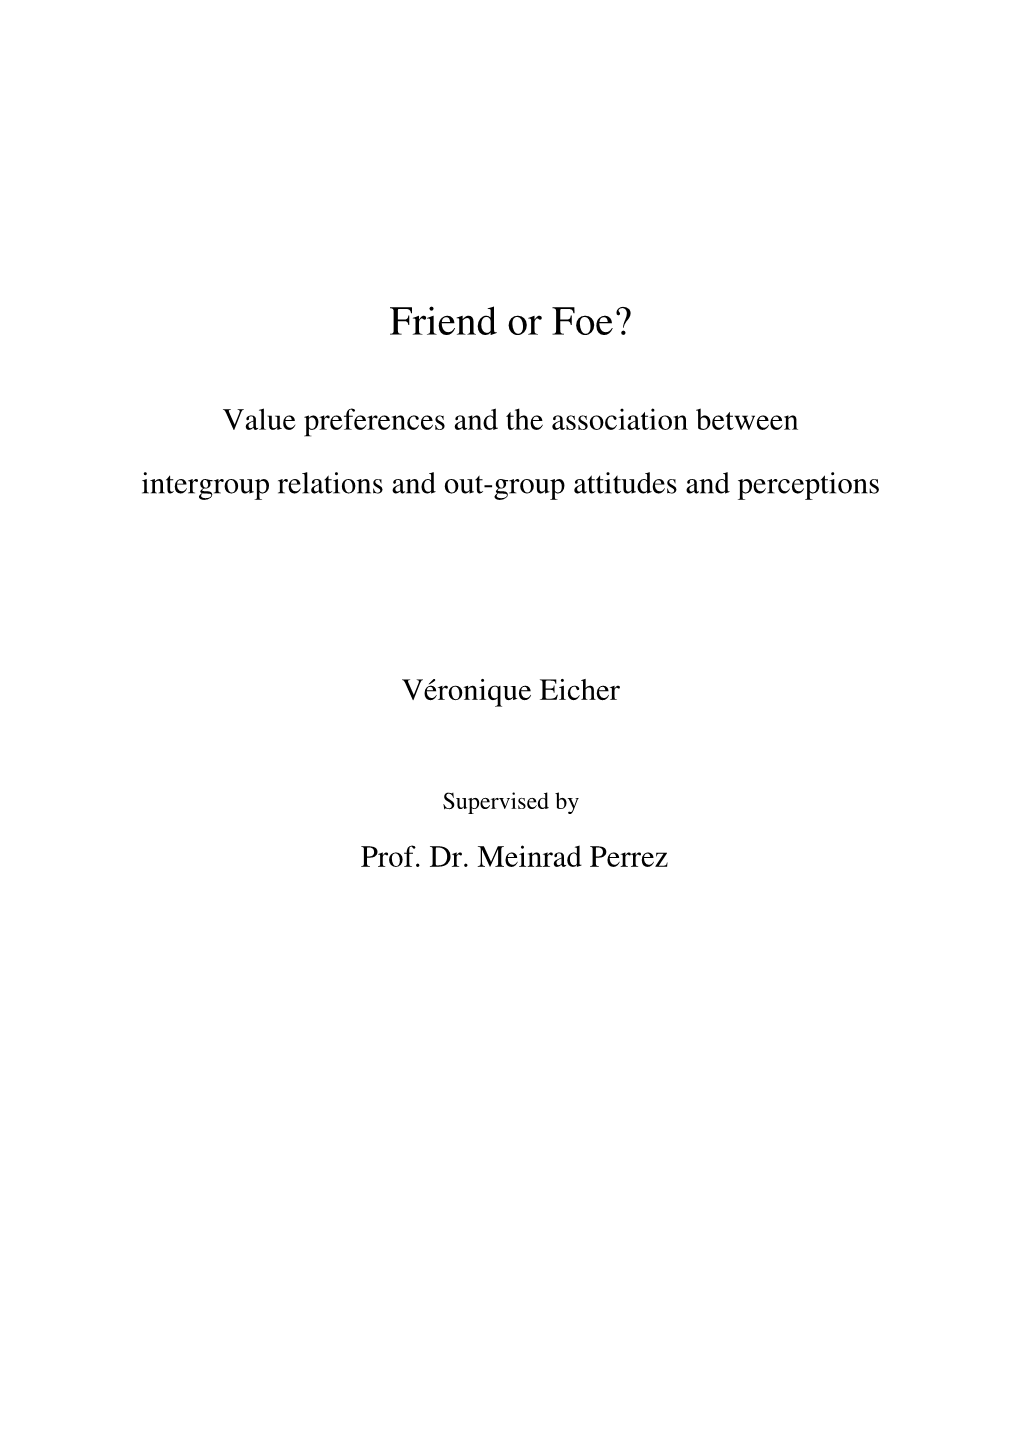 Friend Or Foe? Value Preferences and the Association Between Intergroup Relations and Out-Group Attitudes and Perceptions